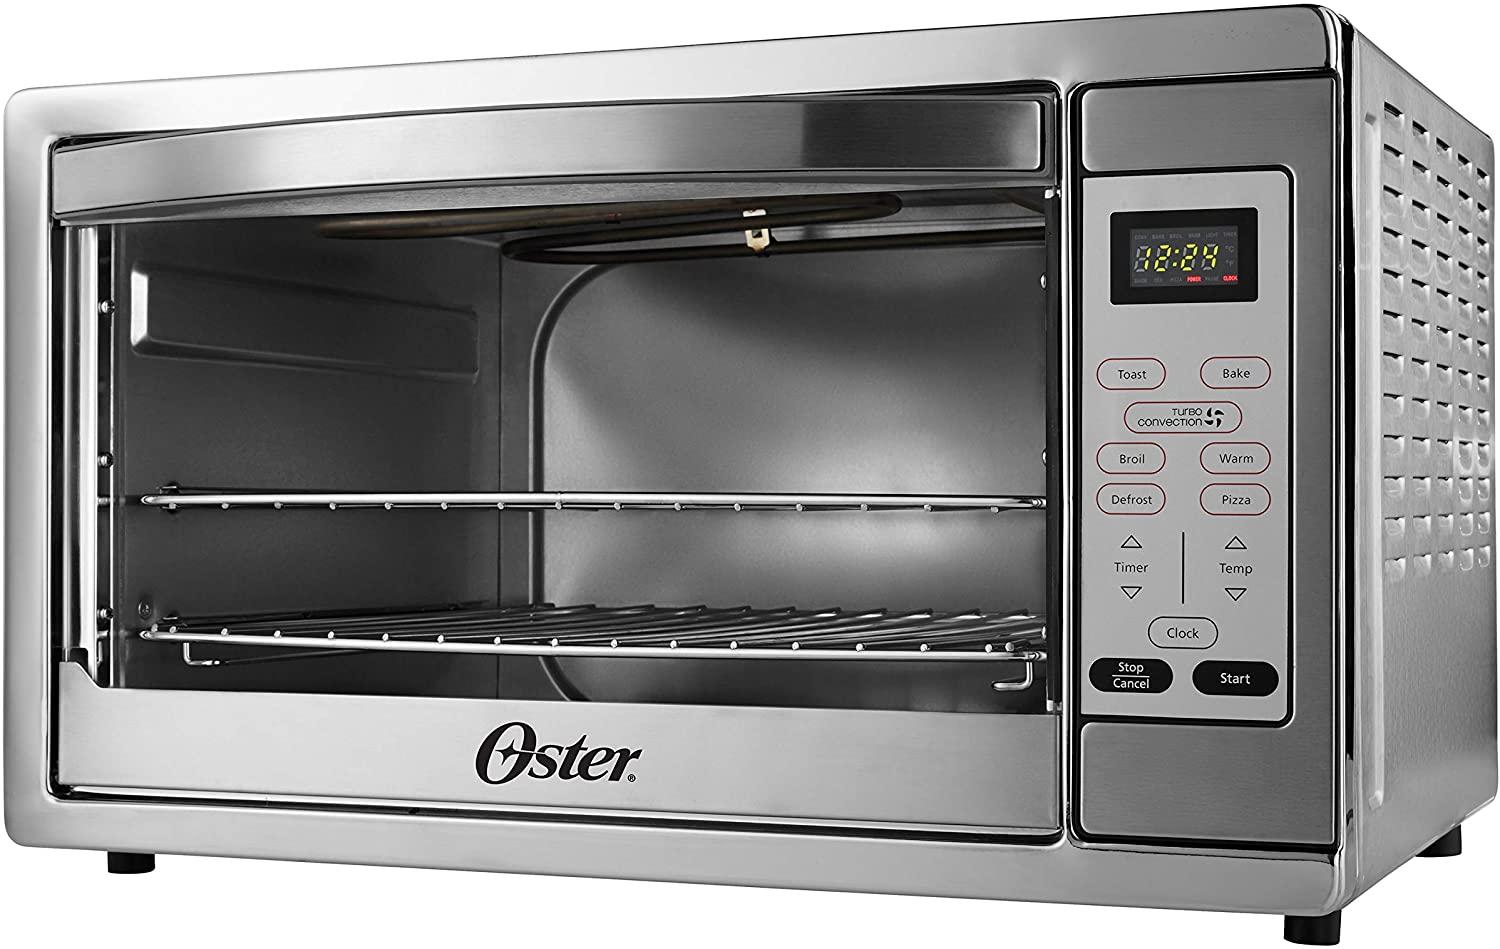 Oster Extra Large Digital Countertop Convection Oven for $83.99 Shipped